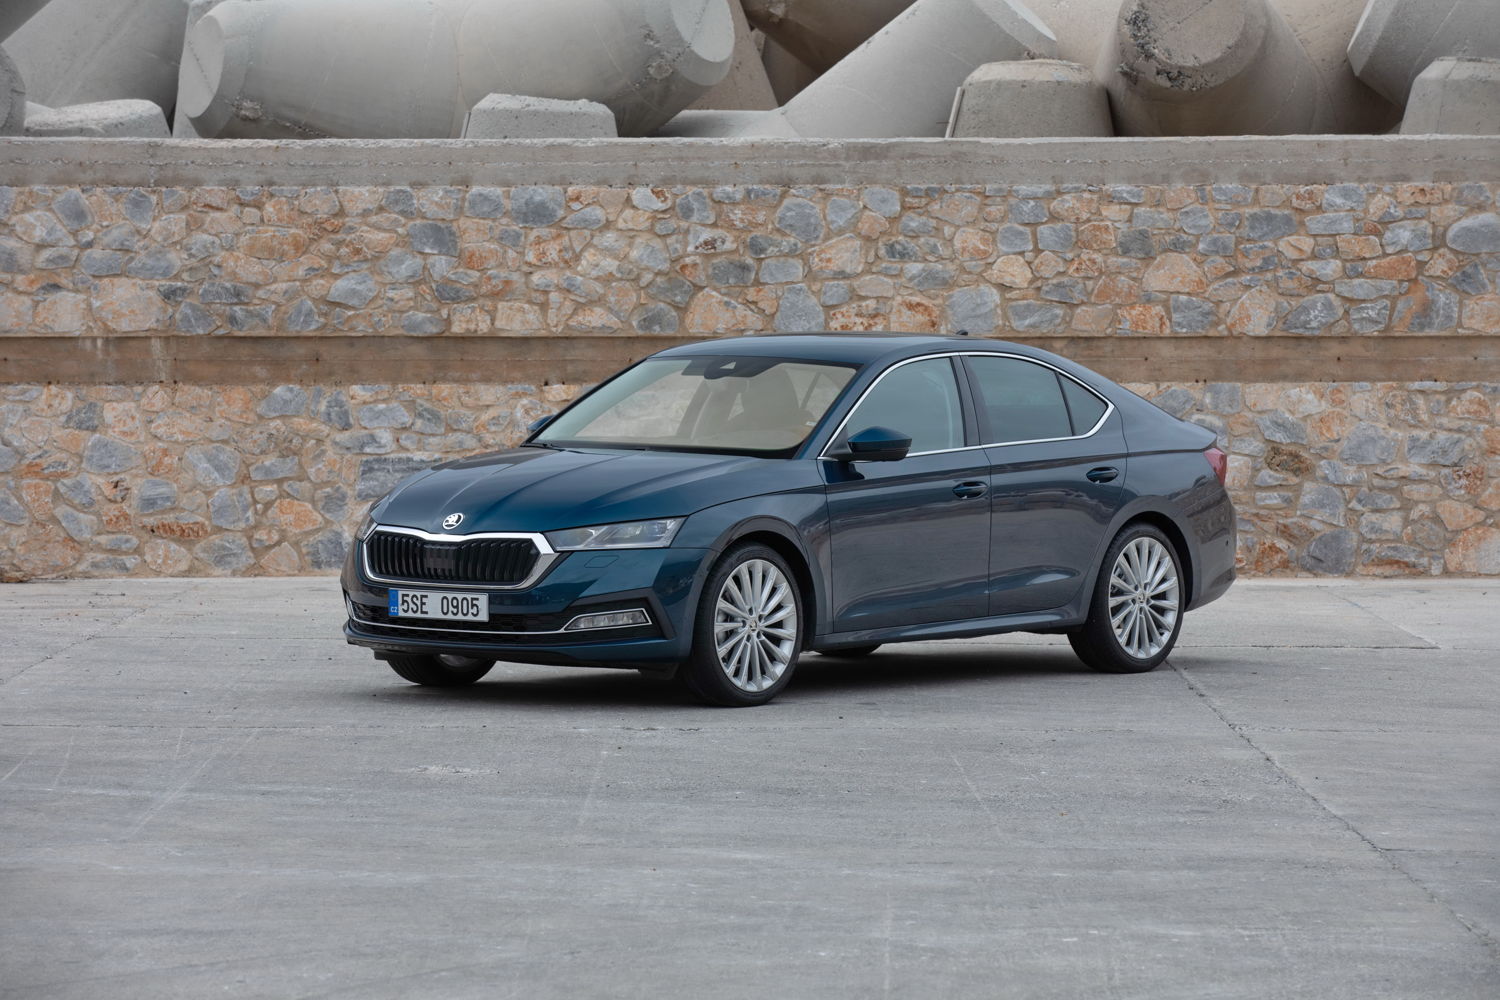 The new ŠKODA OCTAVIA G-TEC is designed to run on
environmentally friendly compressed natural gas (CNG).